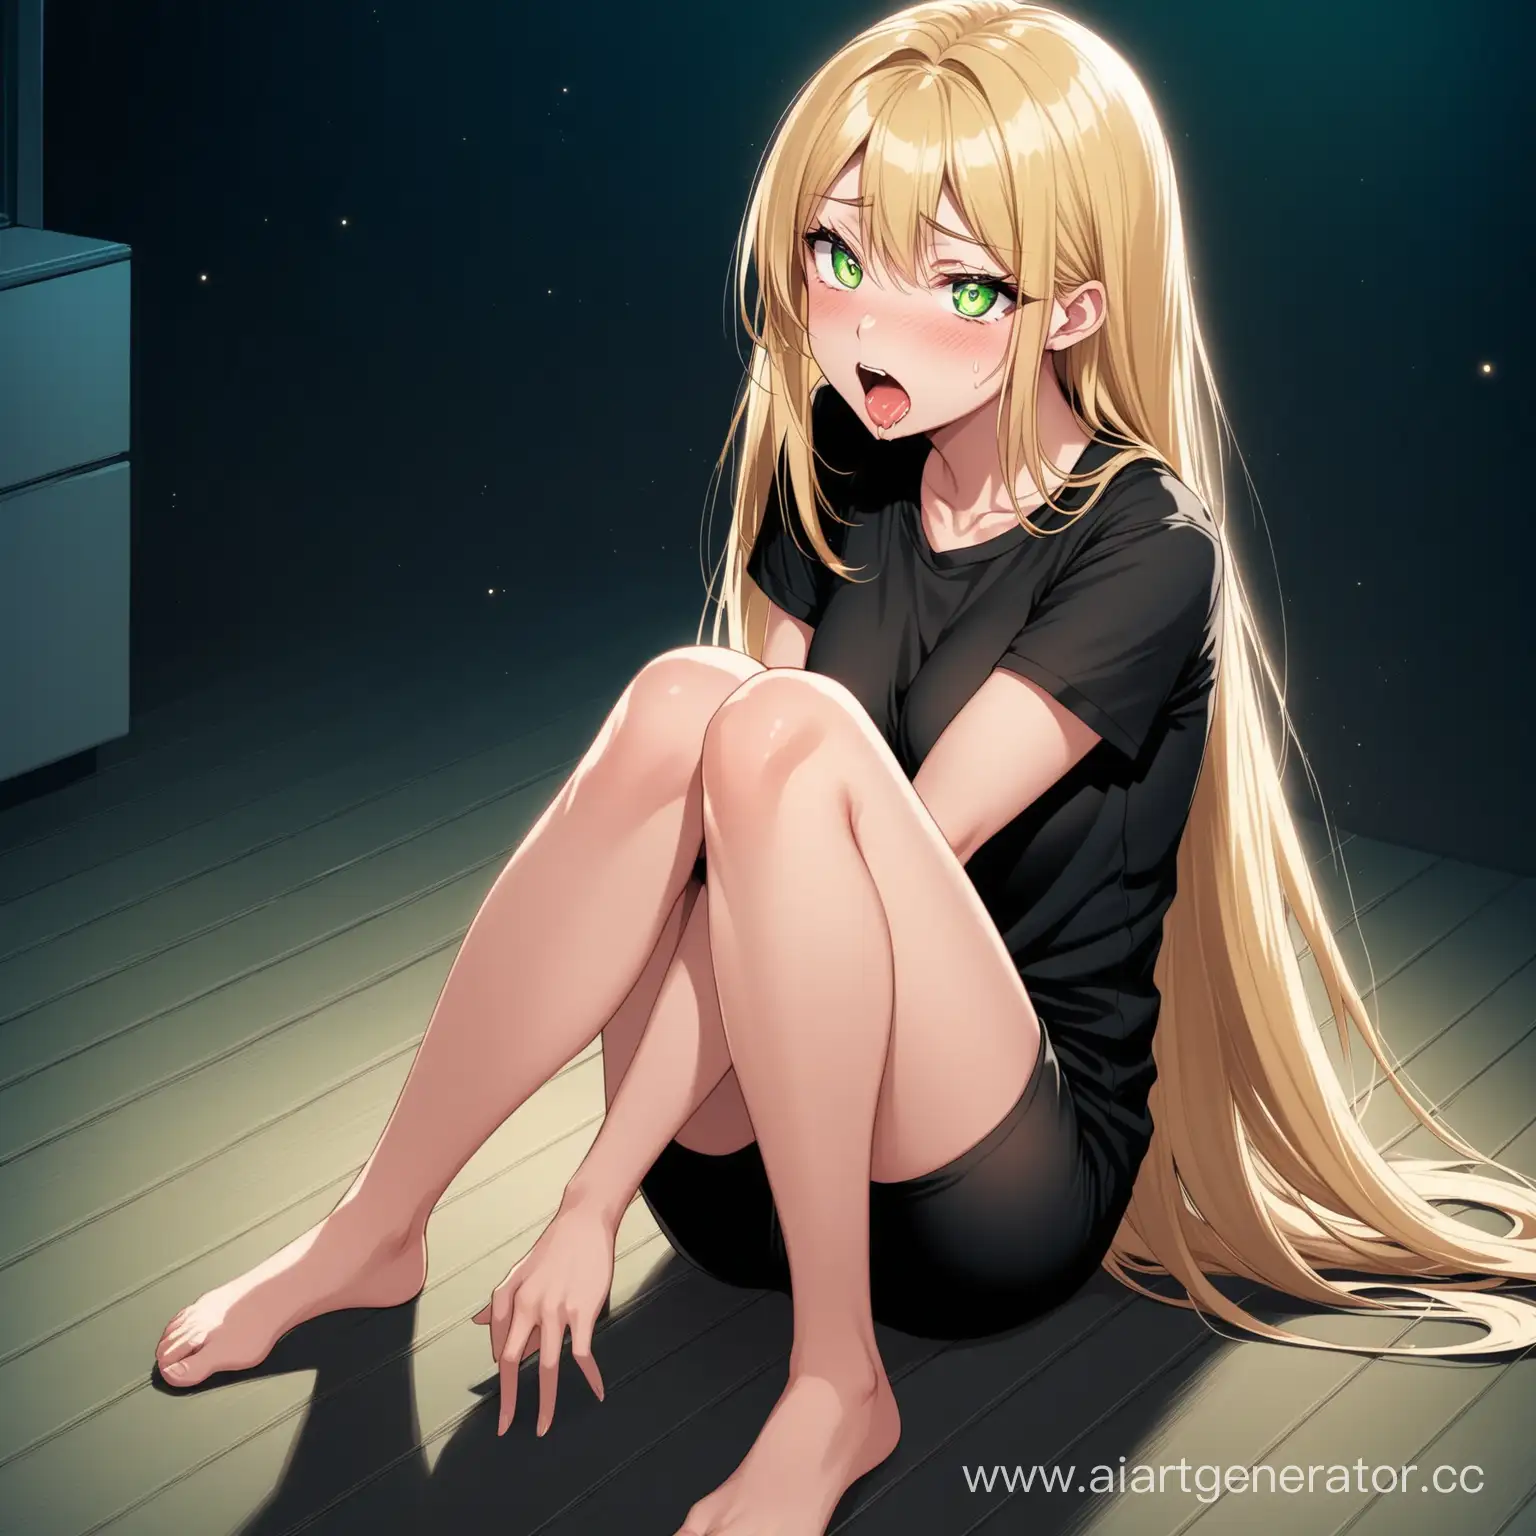 girl has a beautiful appearance, long straight blonde hair and big green eyes, She is wearing a black T-shirt and sitting on the floor on her knees, ahegao, night atmosphere